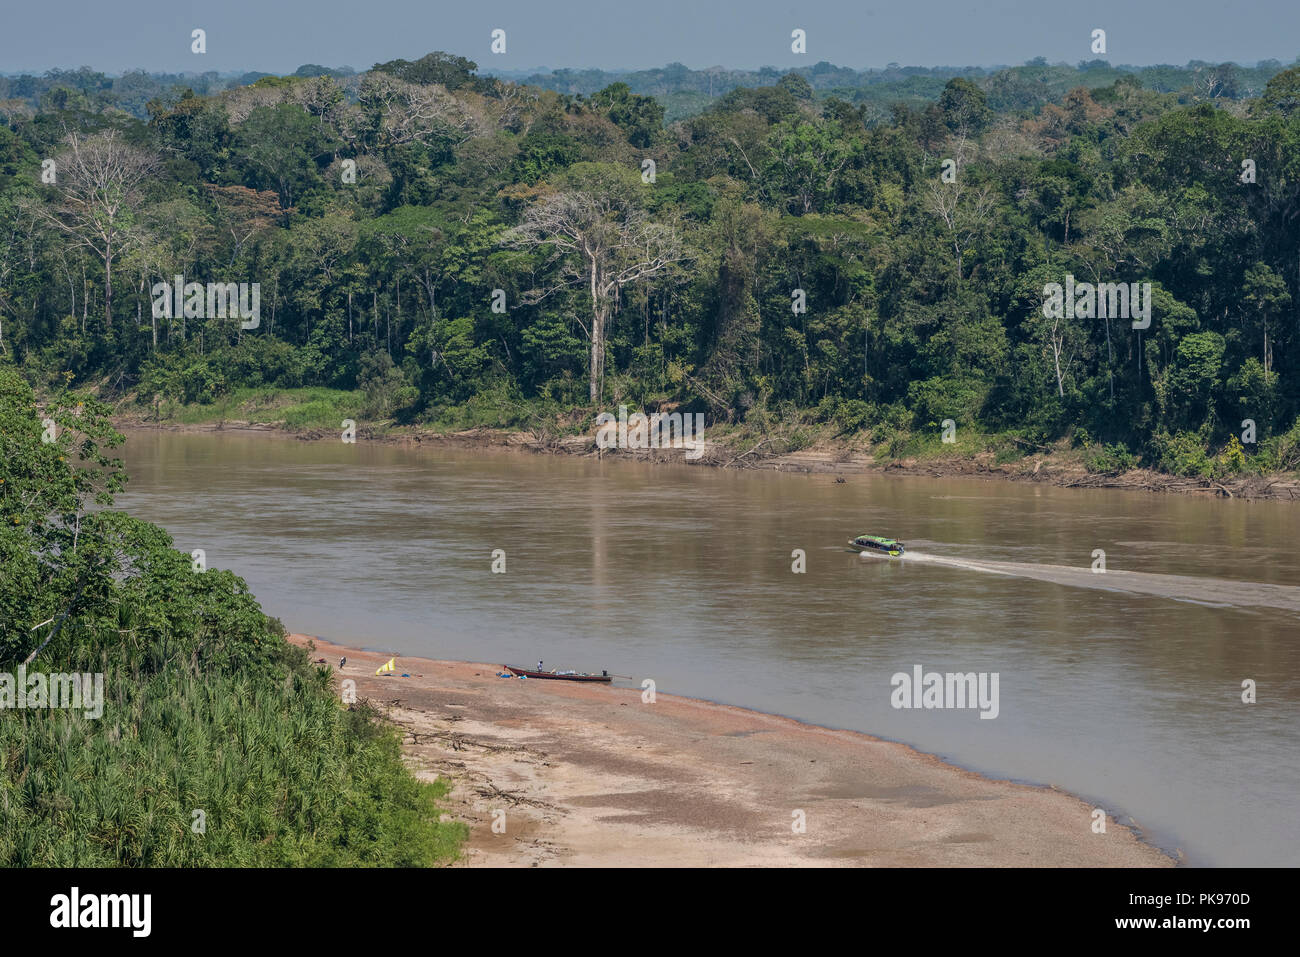 A view of the Amazon jungle near the Madre de Dios river, several boats are visible as that is the preferred mode of transportation with no roads. Stock Photo